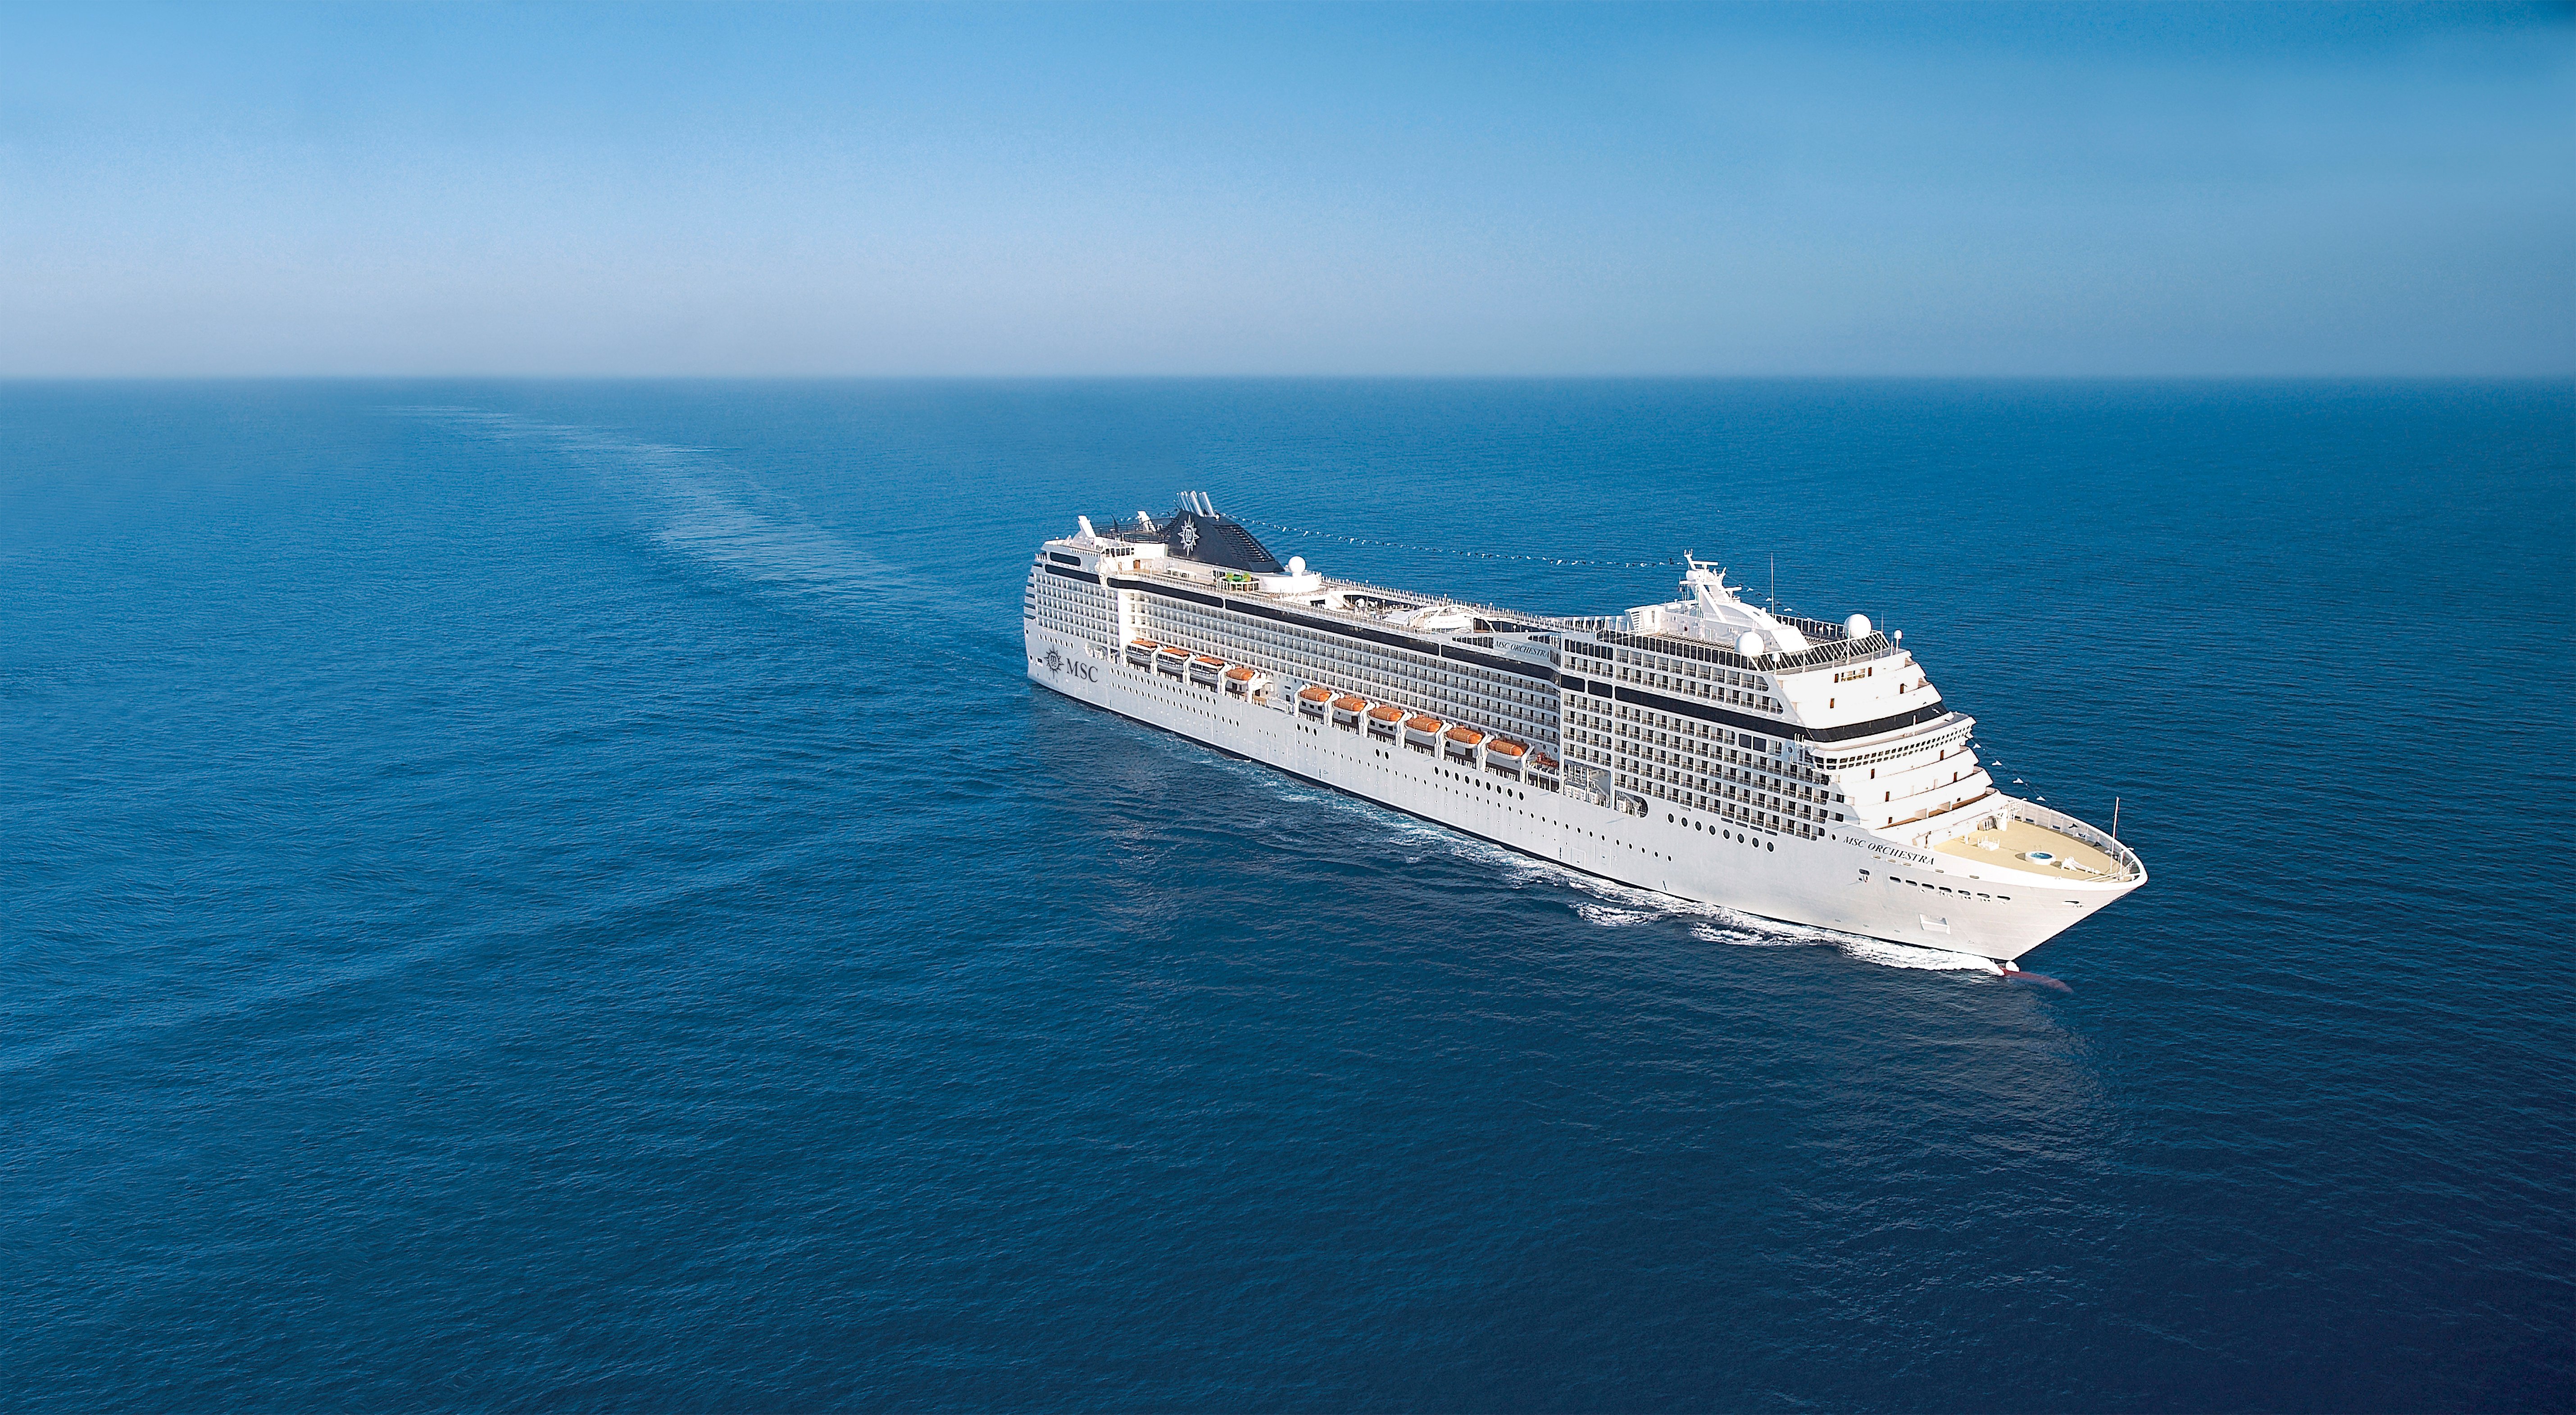 MSC Orchestra, MSC Opera sister ship - lastest cruise fare and specials from MSC Cruises